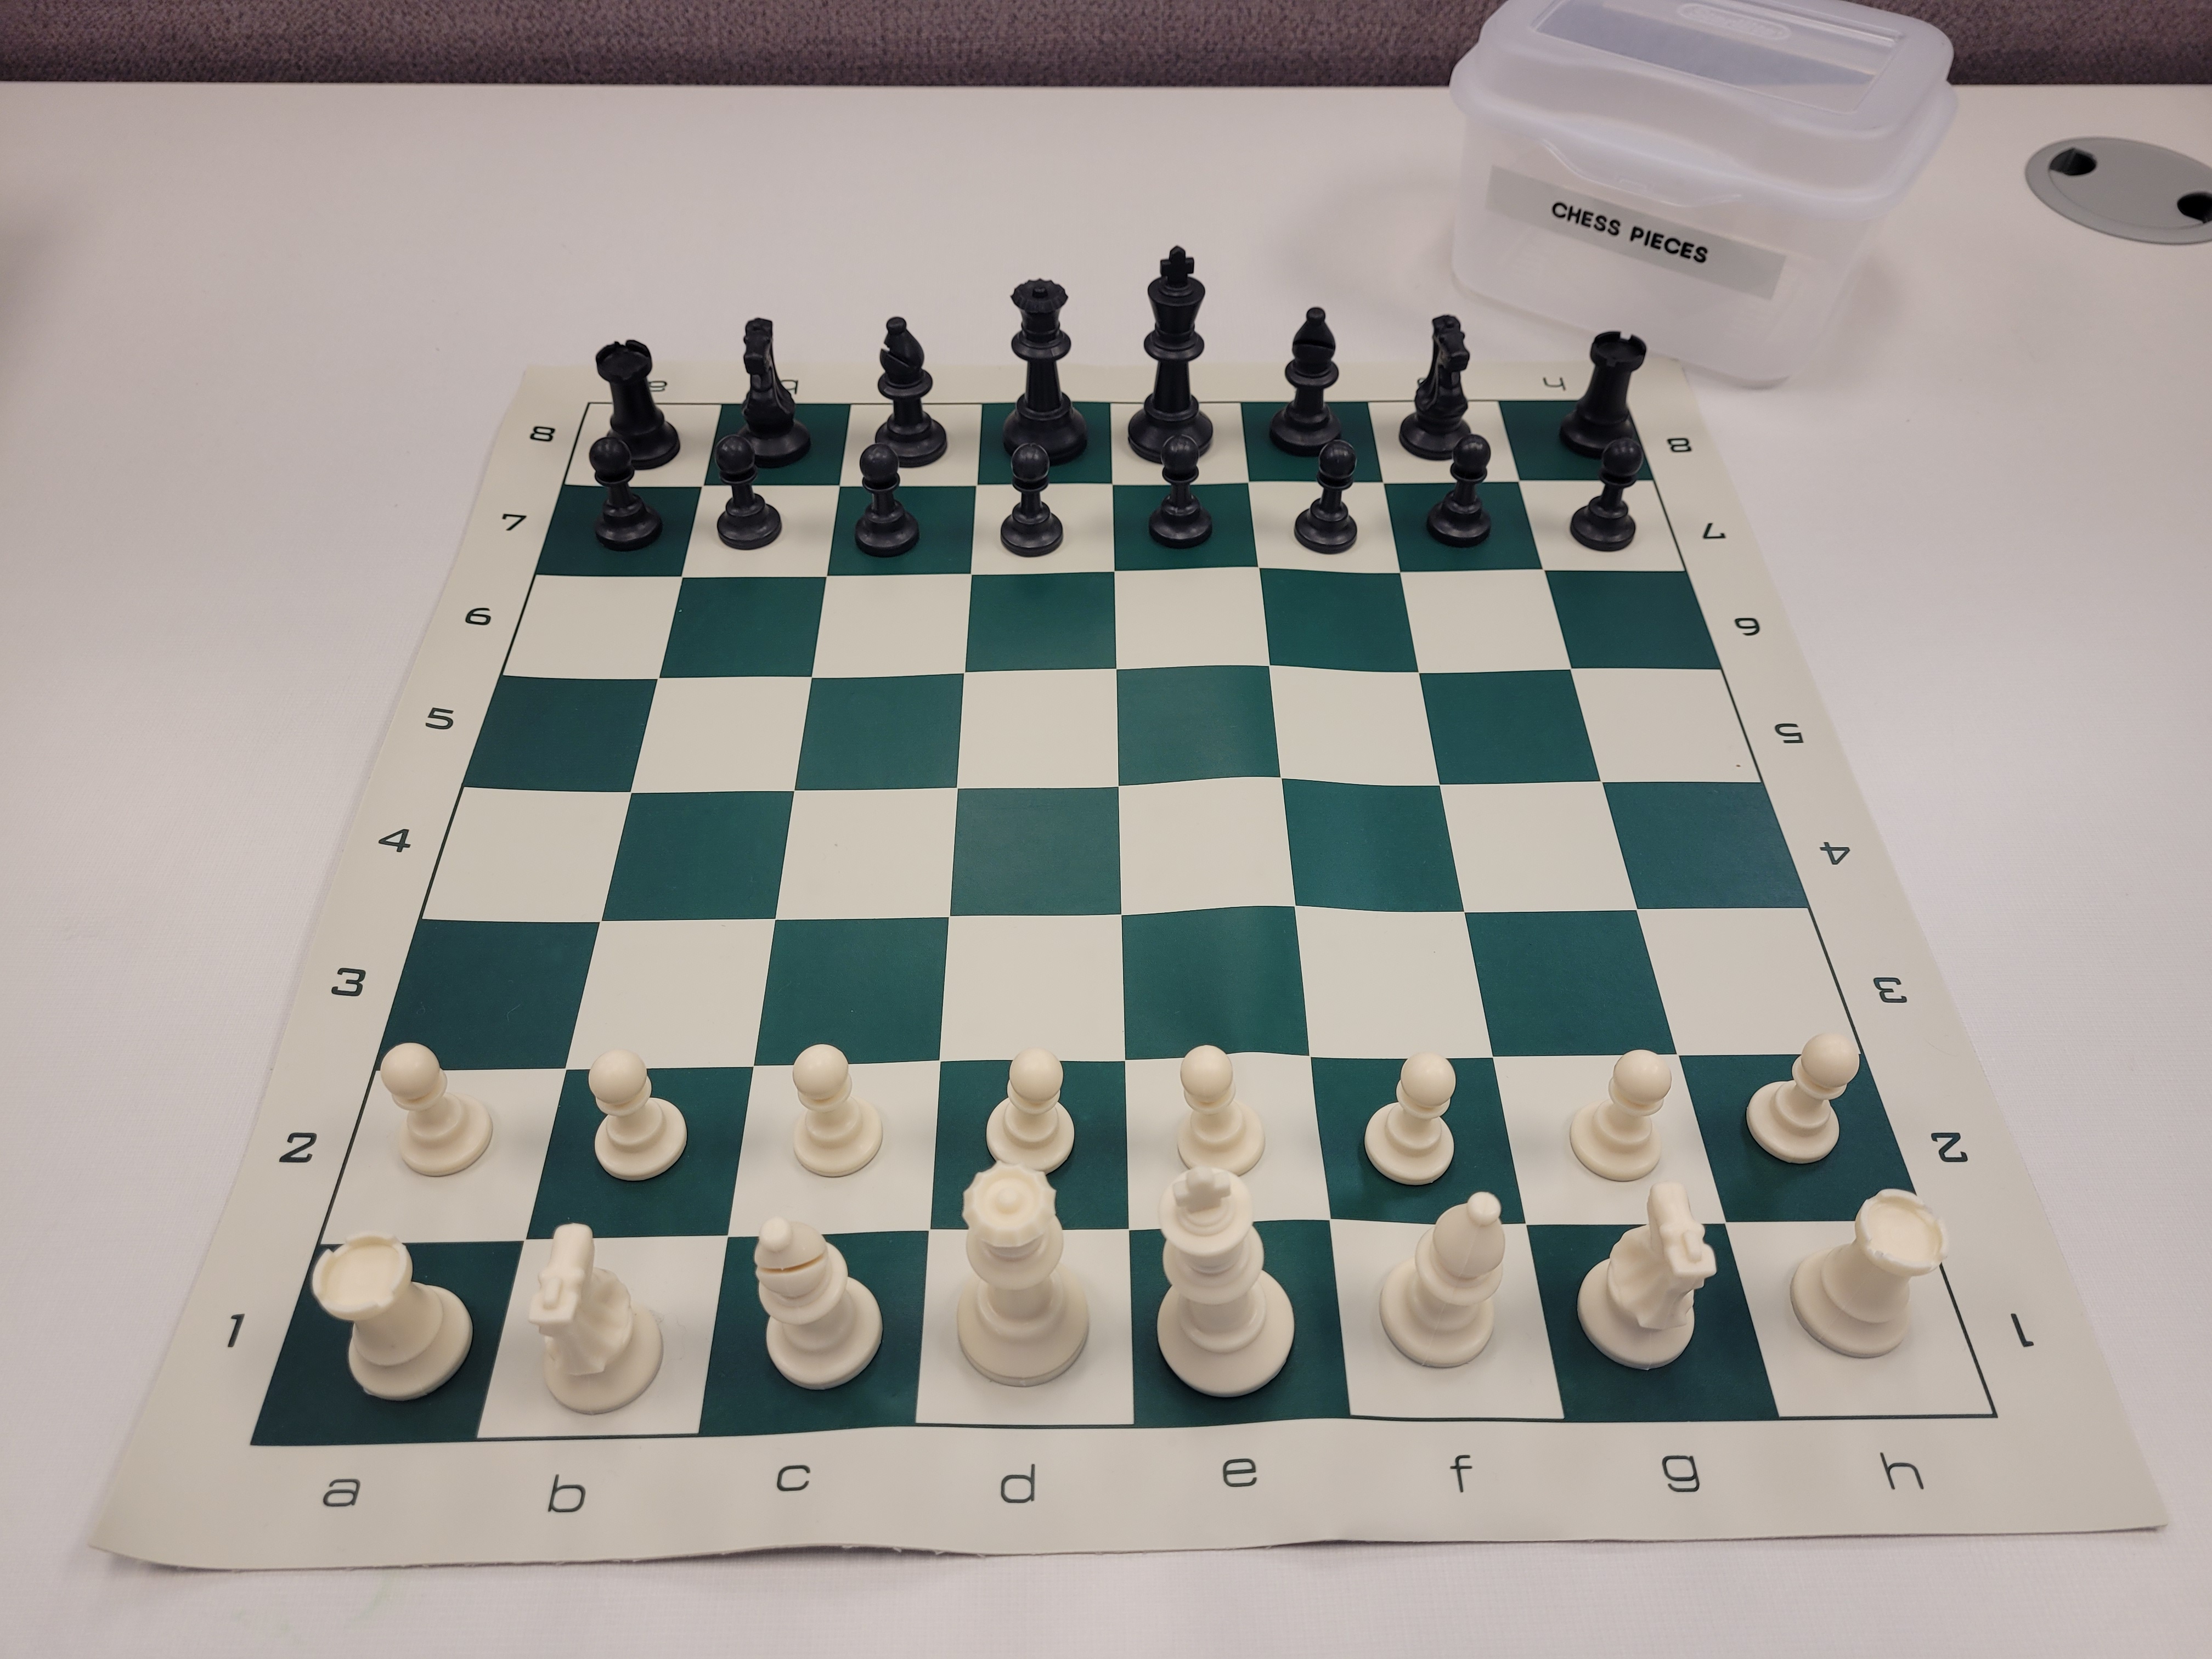 A chess board set up and ready to play